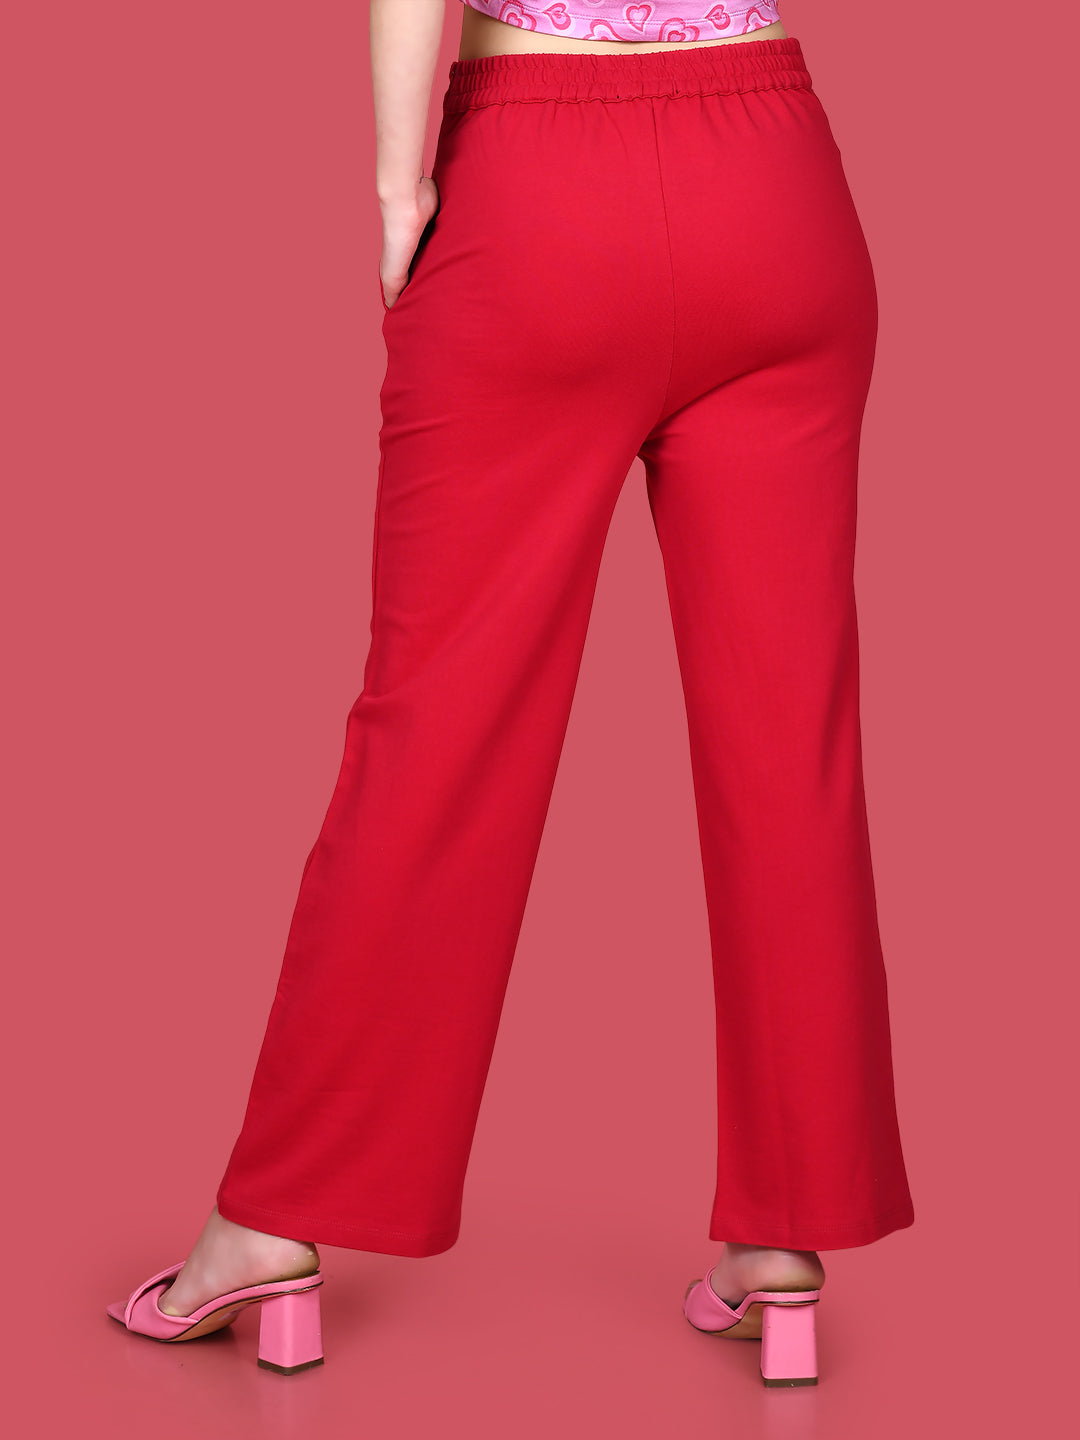 Boohoo Arabella Extreme Wide Leg Trousers ($13) ❤ liked on Polyvore  featuring pants, red palazzo pants, wi… | Red palazzo pants, Red zip ups, Wide  leg palazzo pants